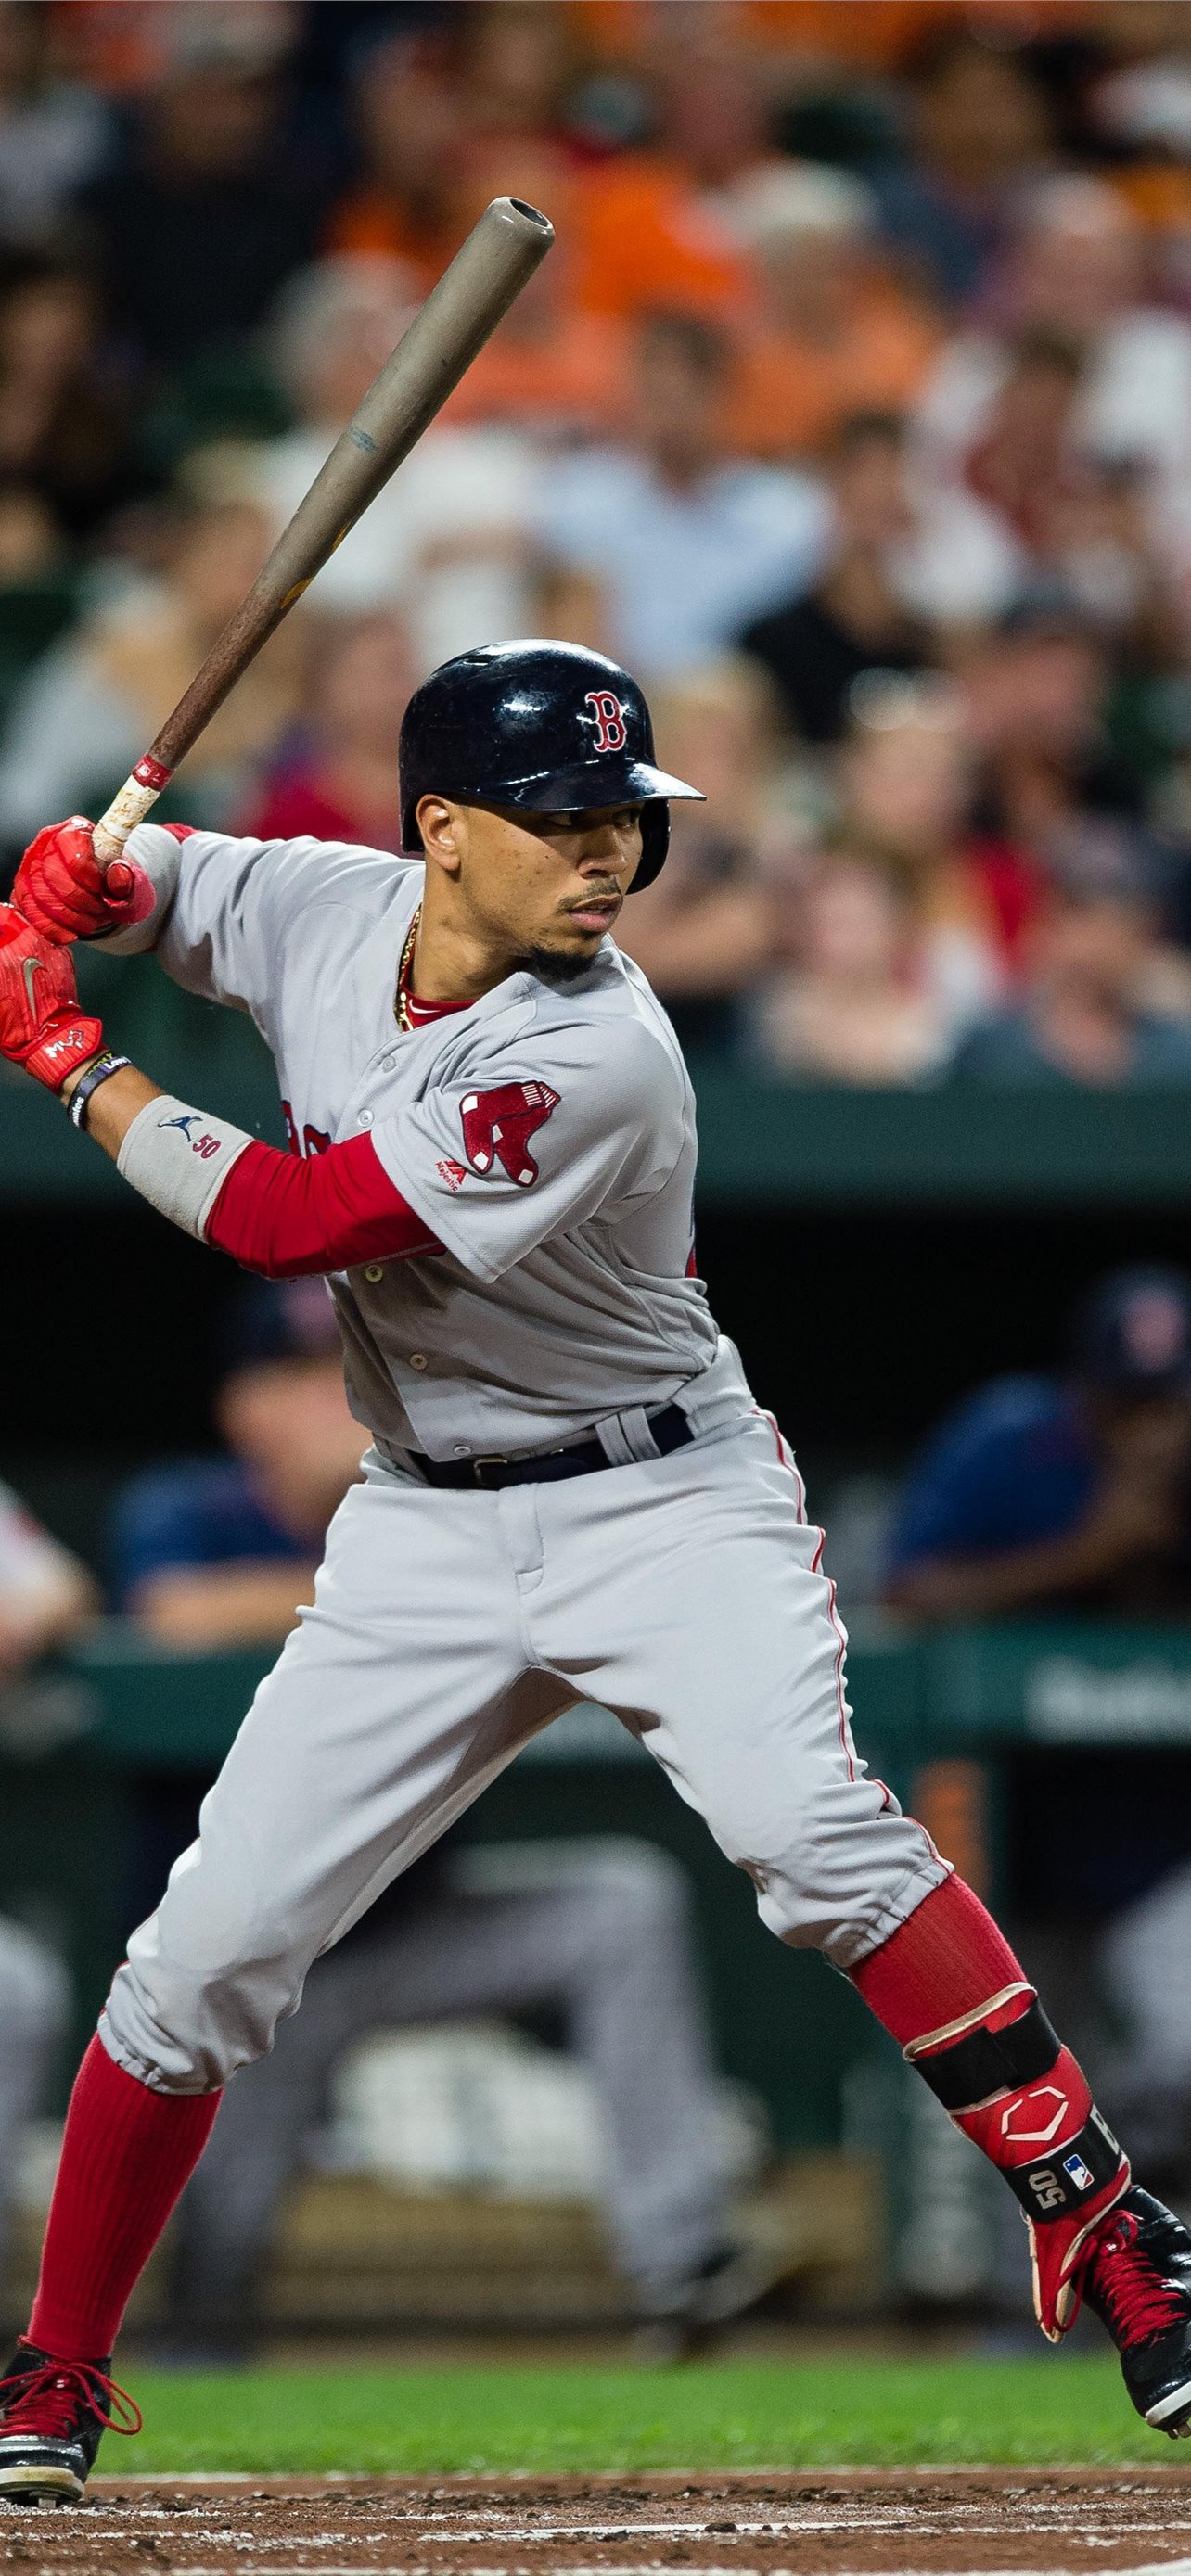 mookie betts iPhone Wallpapers Free Download